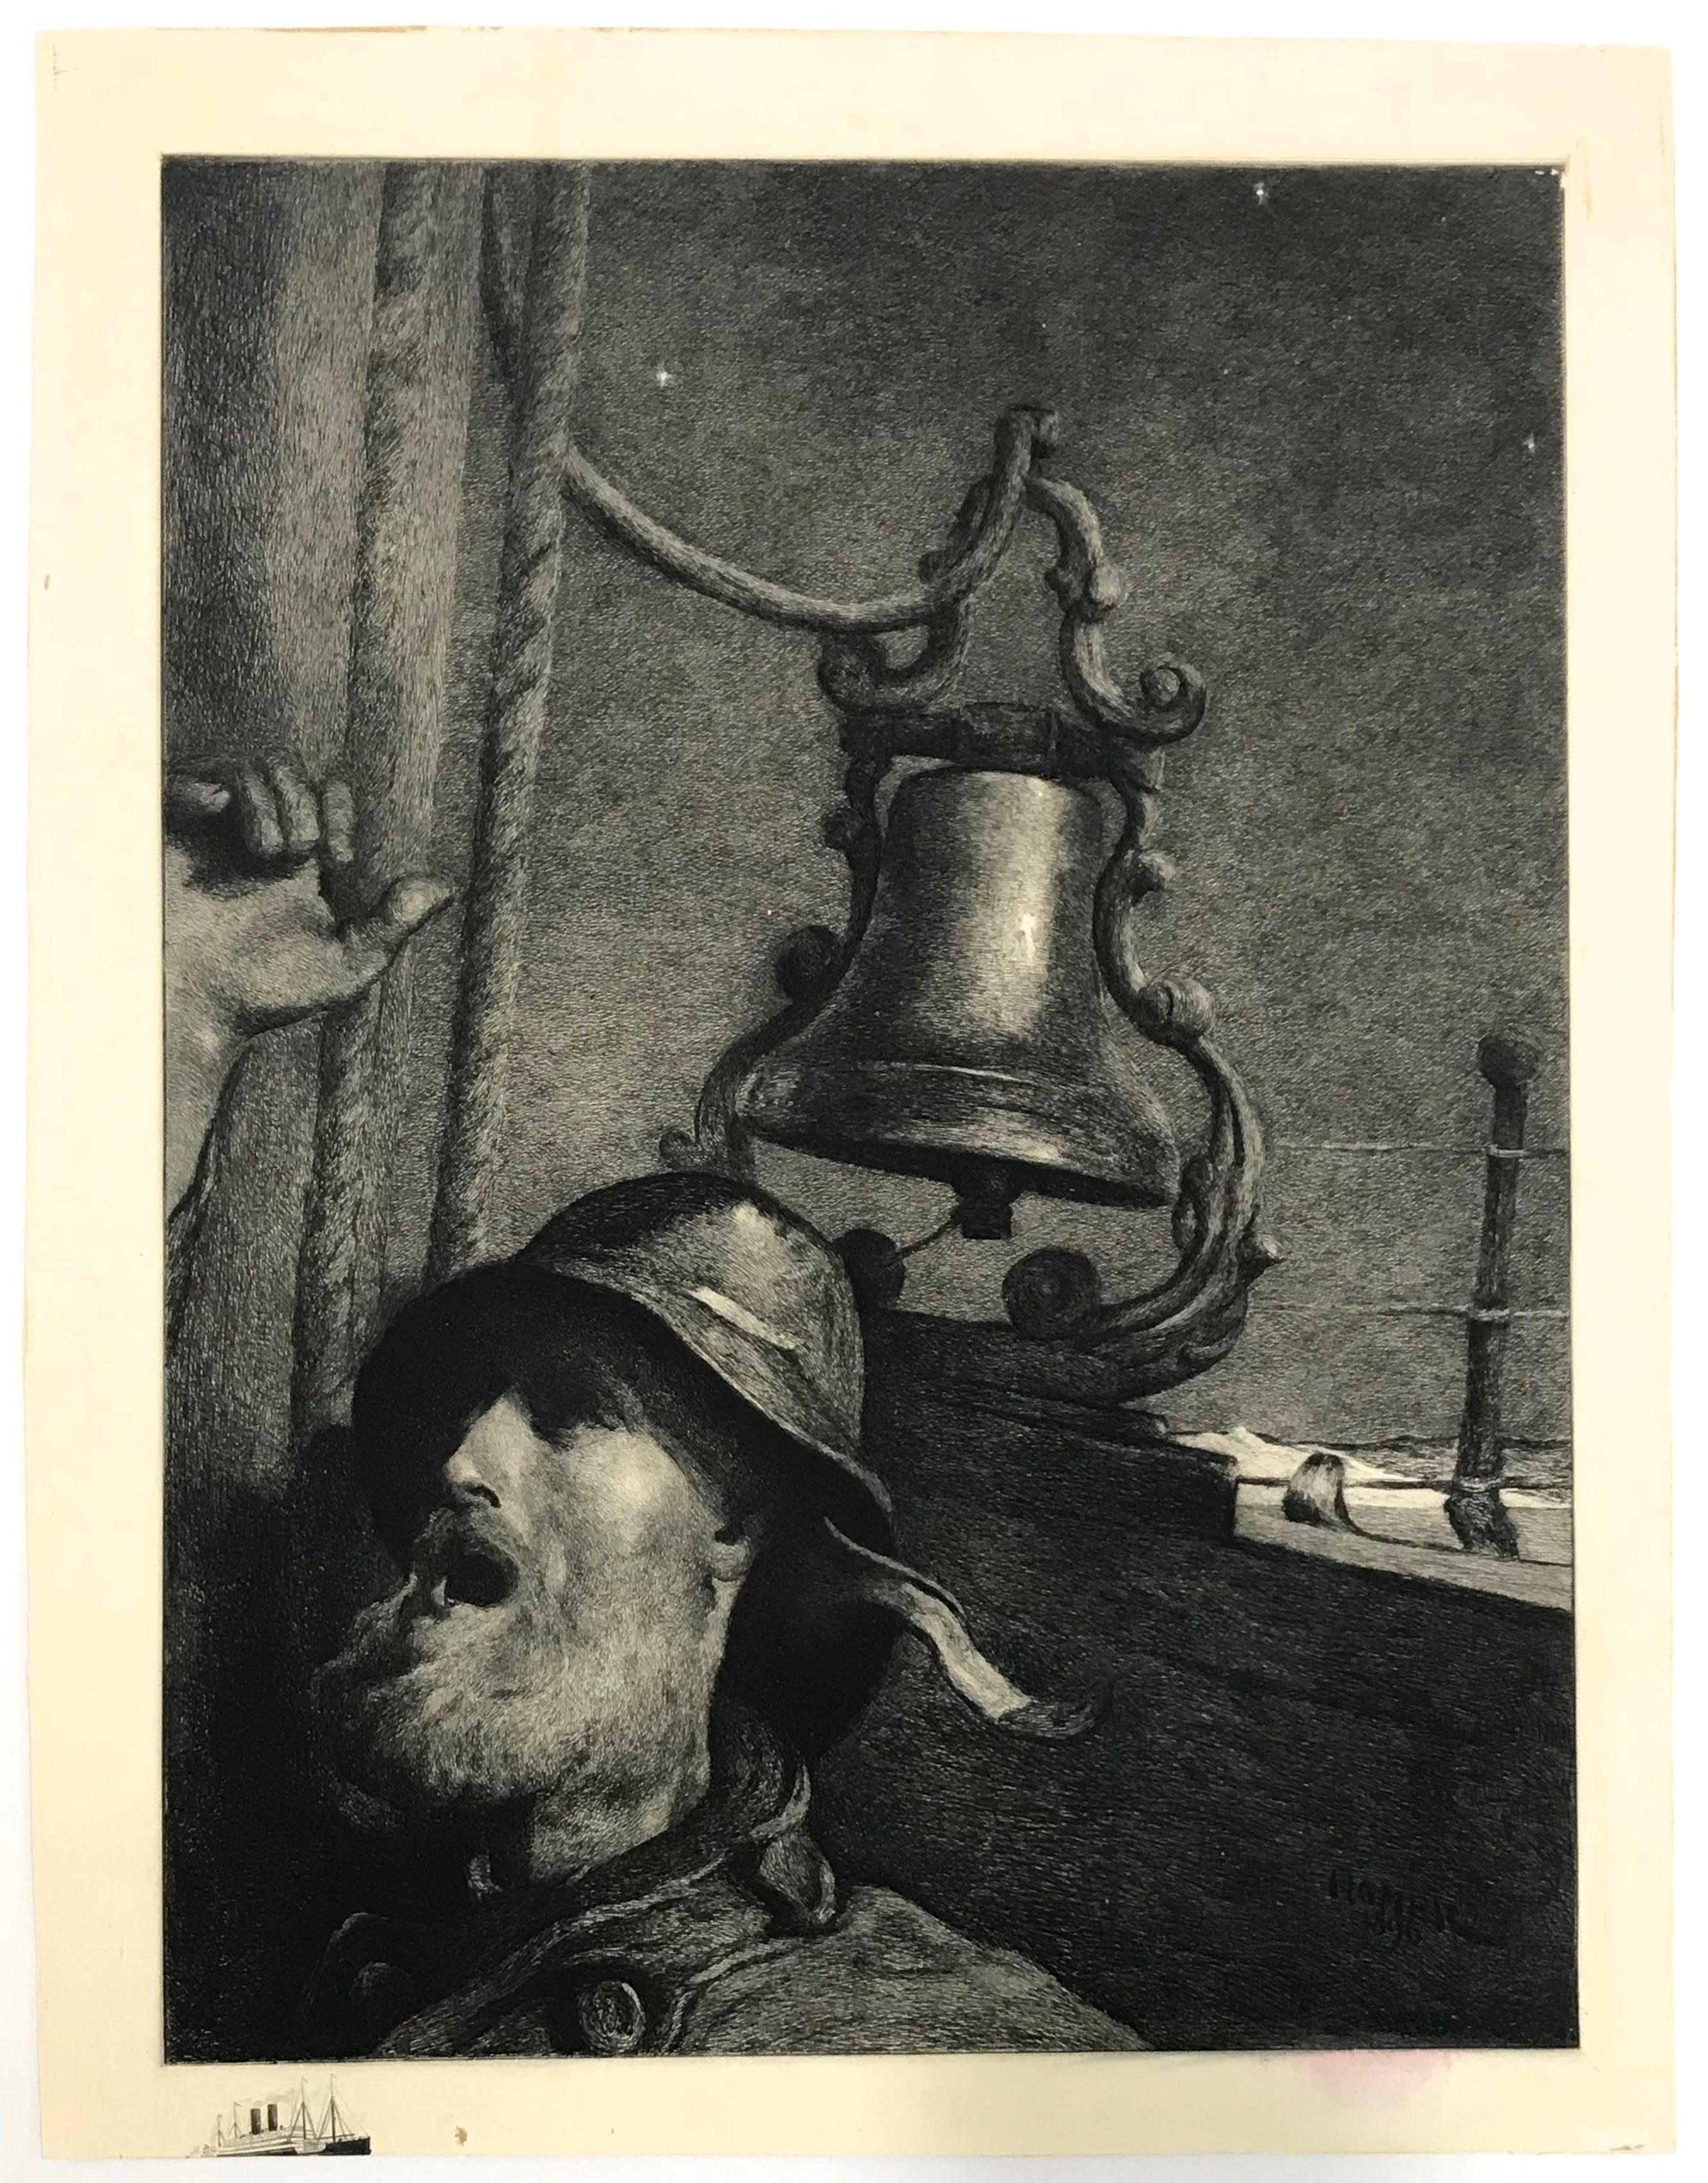 Medium: etching (etched by William Bicknell after Winslow Homer's 1896 painting). Although there is no inscription, it is presumed to have been published in 1906 by the John A. Lowell Bank Note Co., Boston, and issued for the Hamburg-American Line